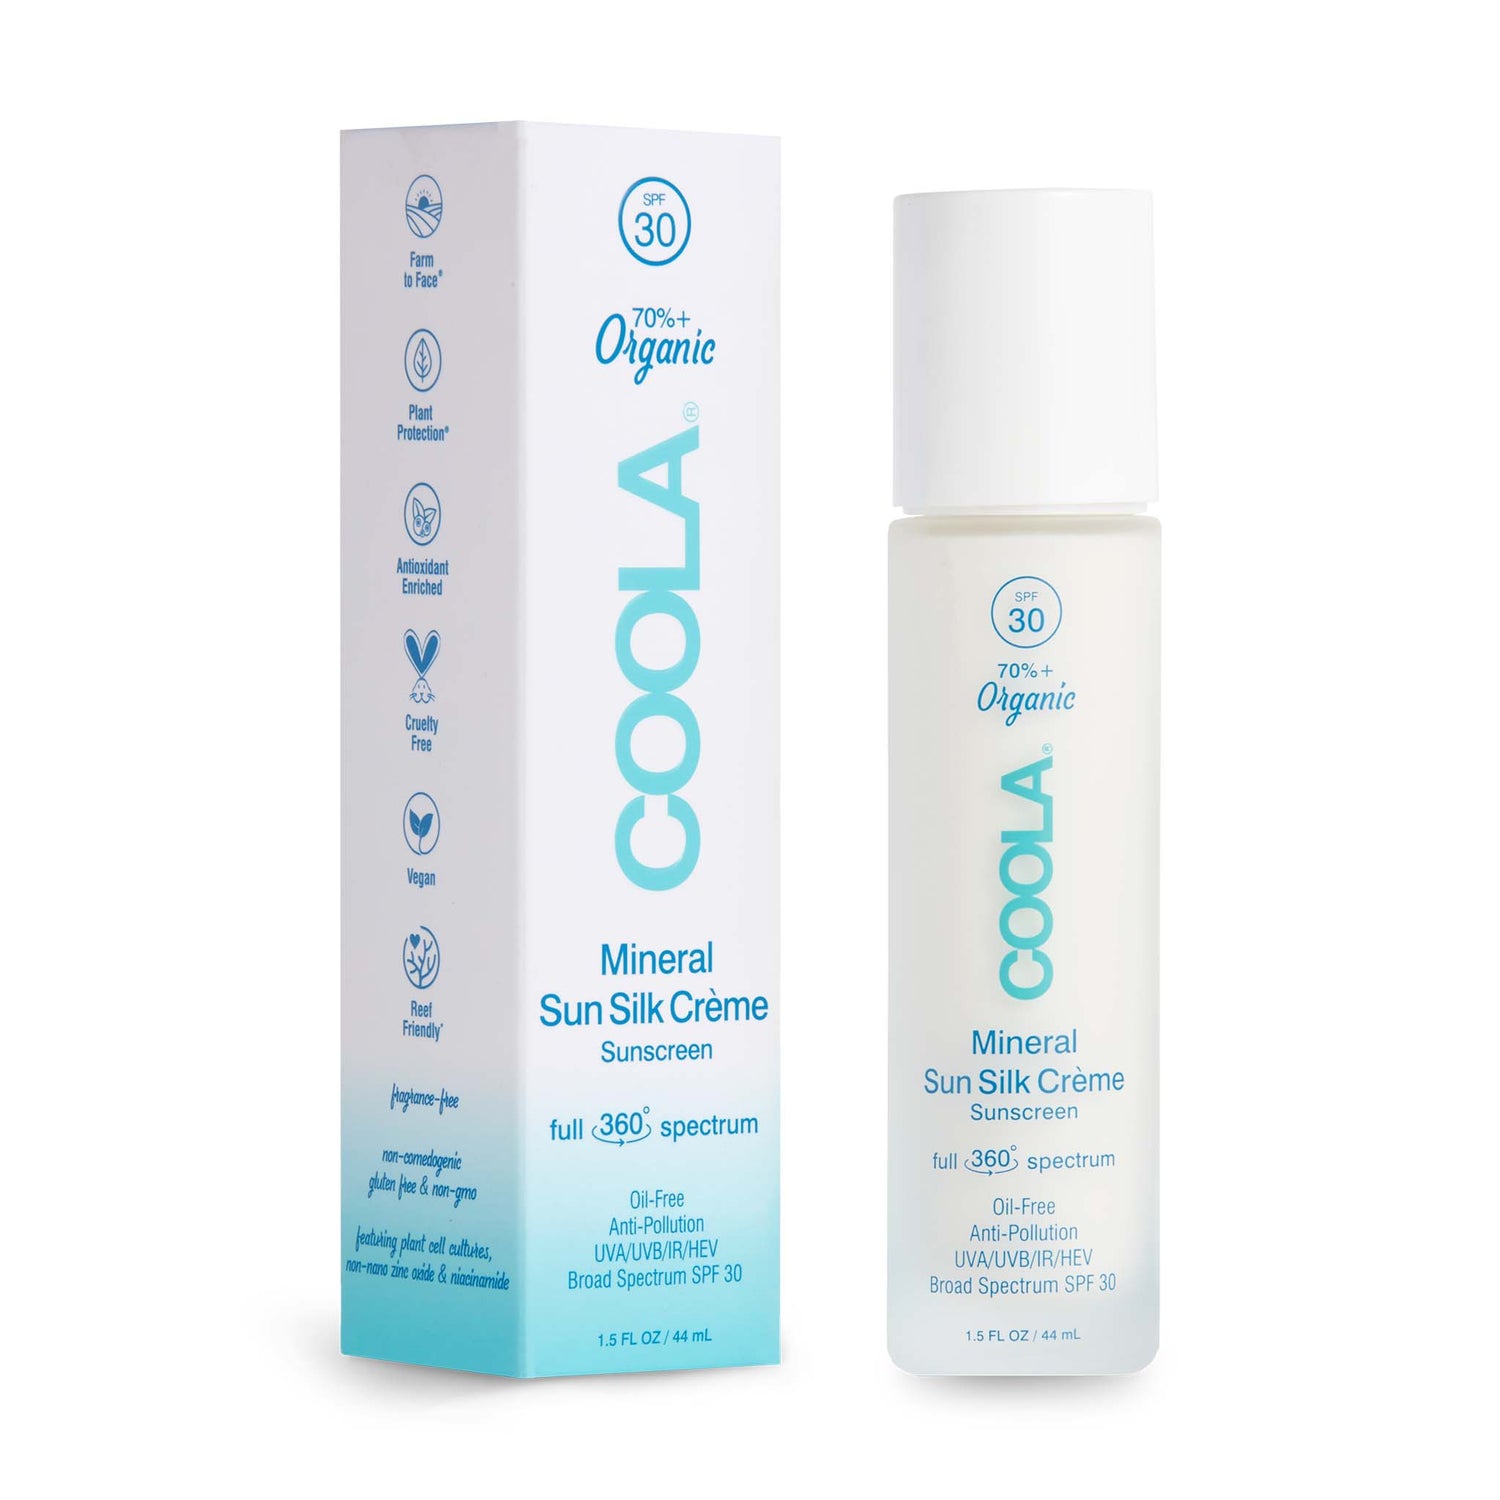 Coola Spf 30 full spectrum protects your face from sun rays and blue light which comes from your electronic devices. 